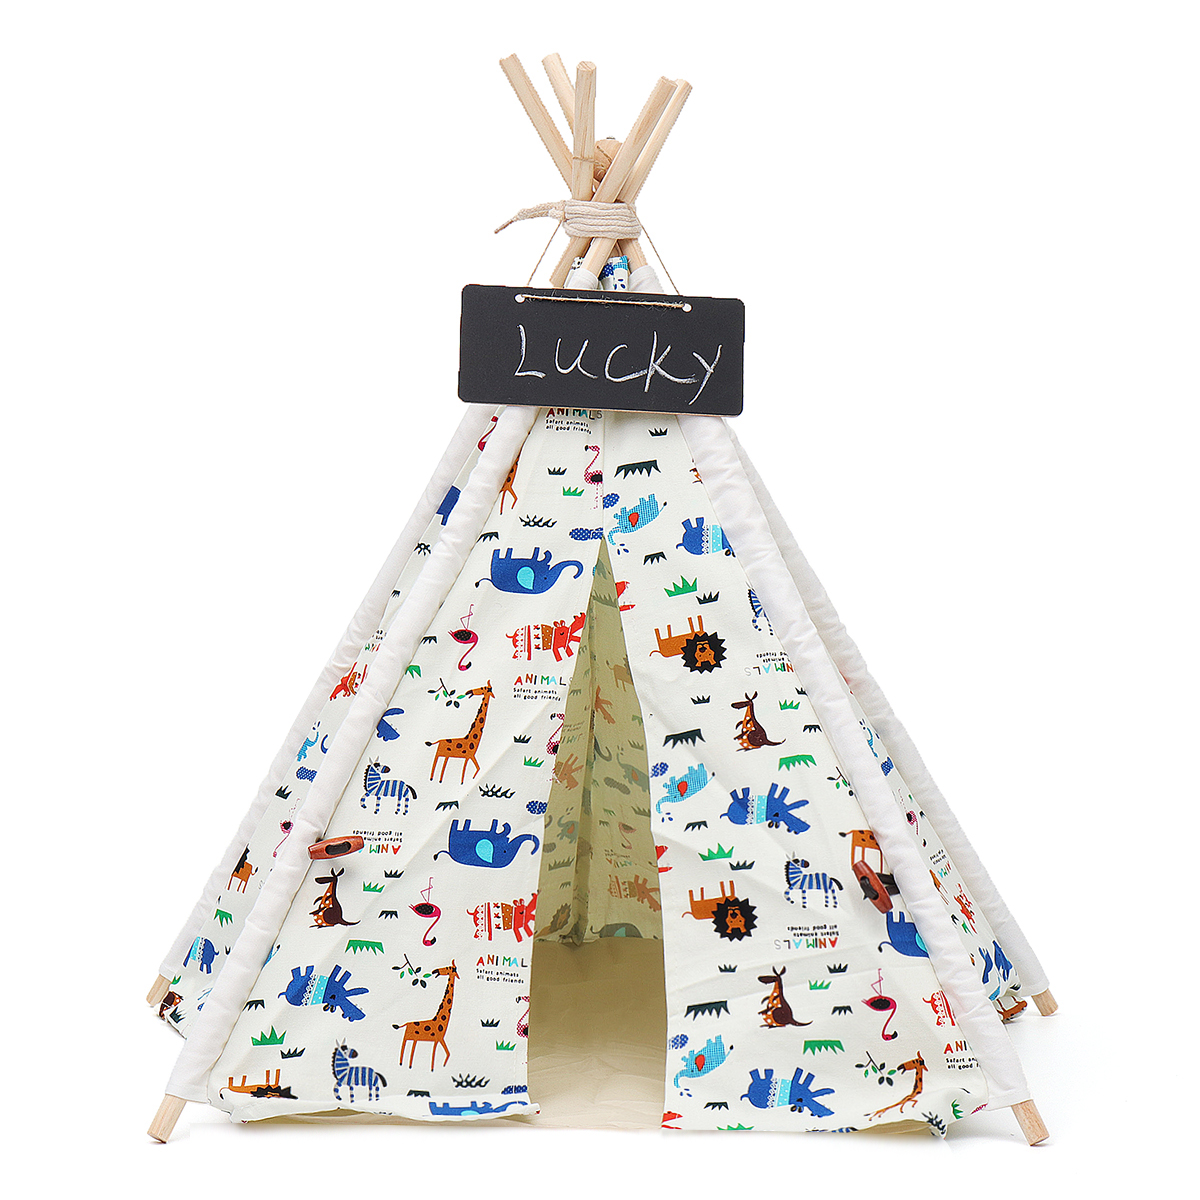 Pet-Dog-House-Washable-Tent-Puppy-Cat-Indoor-Outdoor-Home-Play-Teepee--Pet-Bed-1346120-3